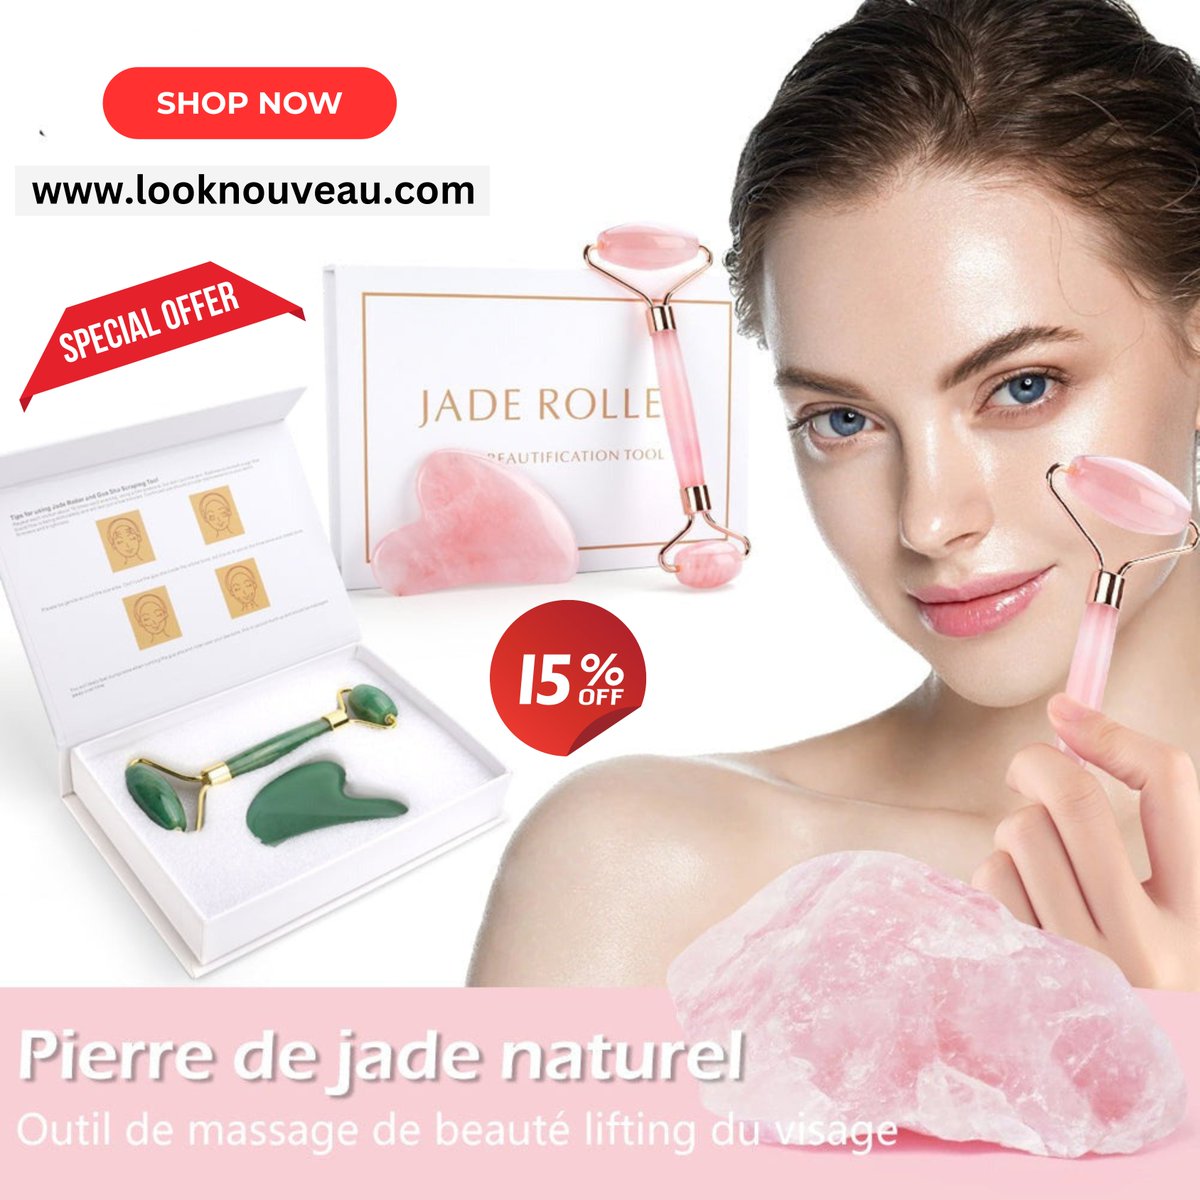 Facial Beauty Roller Skin Care Tools, Rose Quartz Massager for Face, Eyes, Neck, Body Muscle Relaxing and Relieve Fine Lines and Wrinkles.

#faceroller #facialroller #skincaresnob #skincarehacks #facialbenefits #youthfulskin #crystalshop  #jaderoller #beautytips